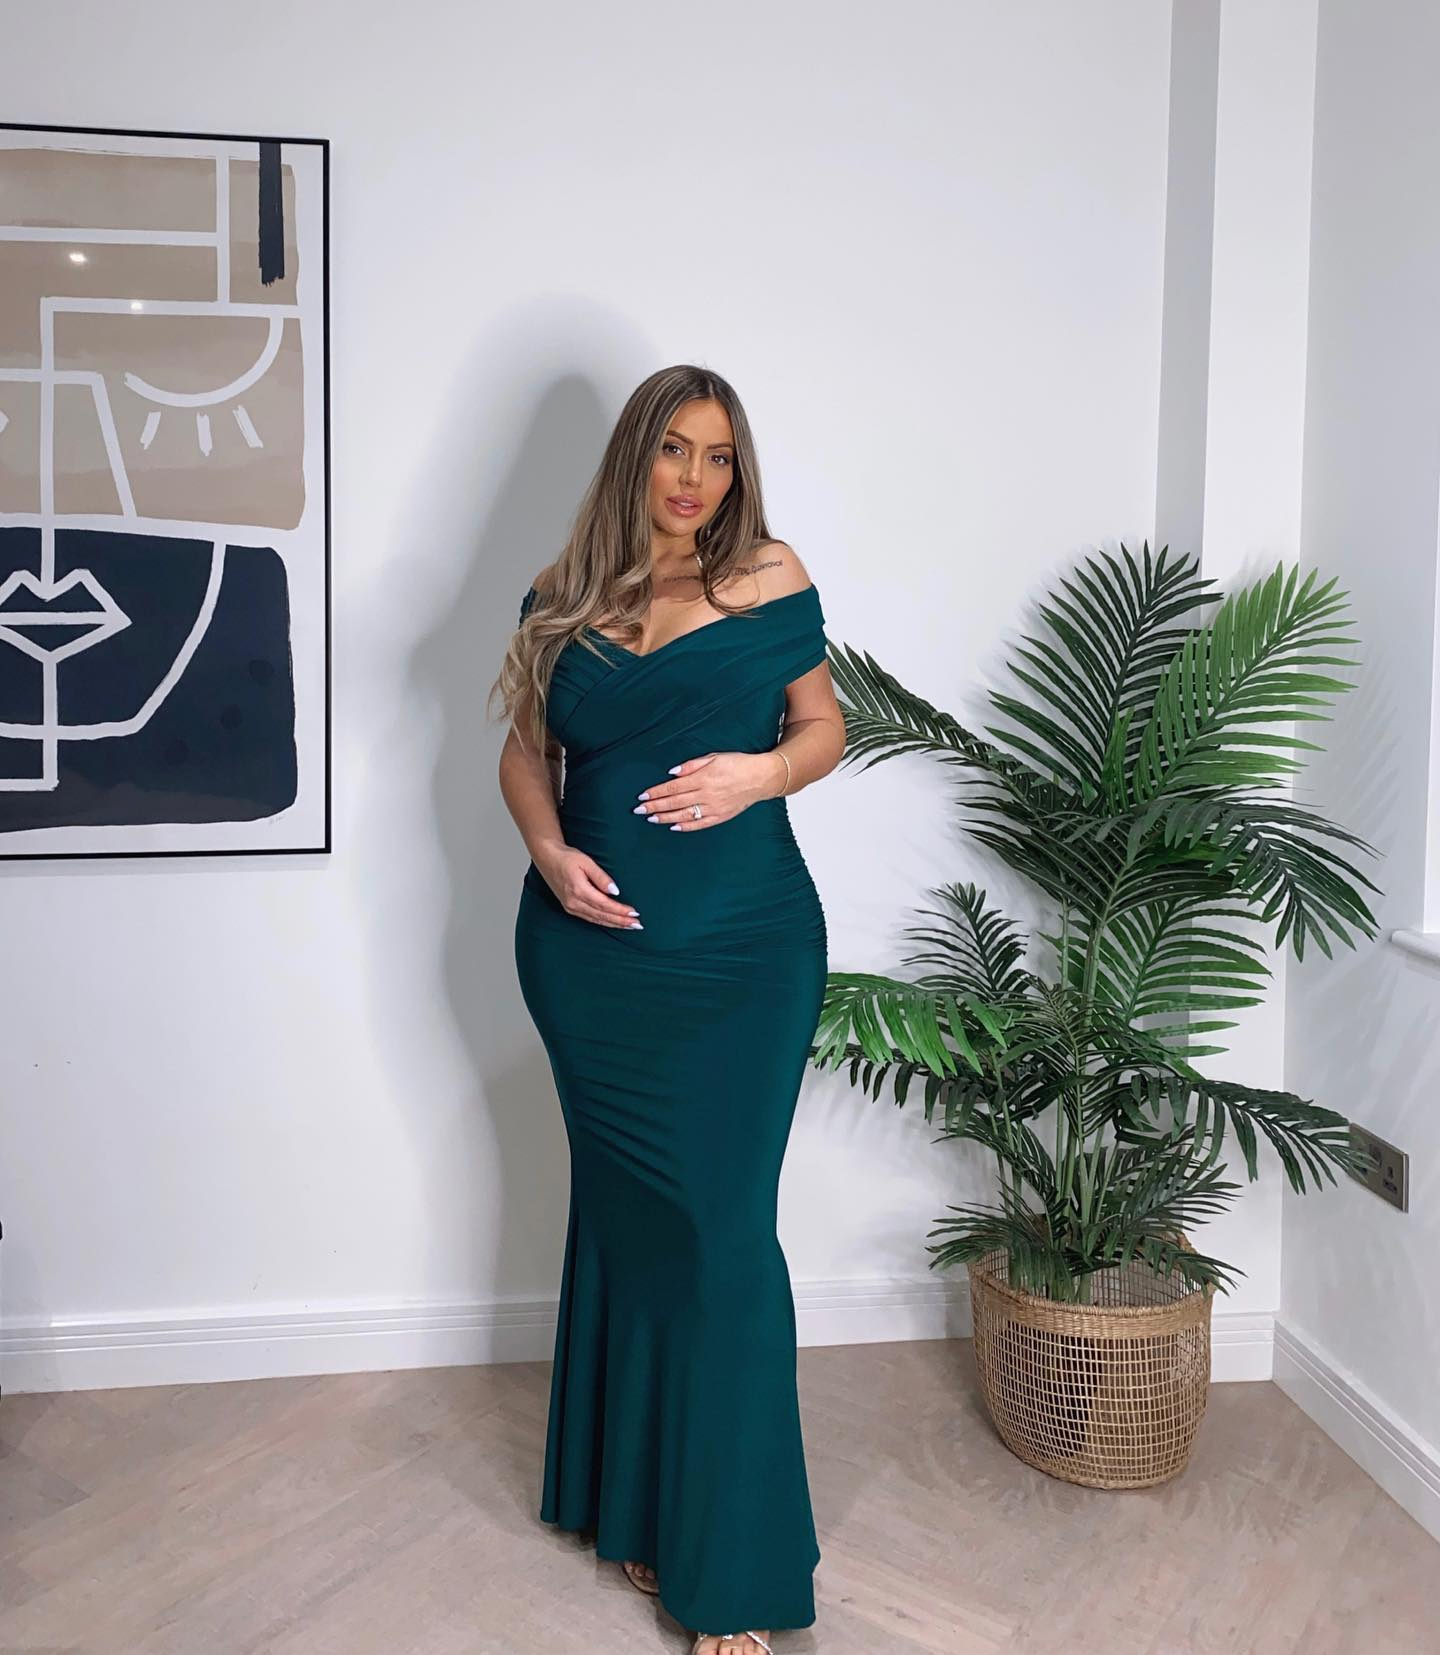 Geordie Shore’s Holly Hagan breaks down in floods of tears as she shares first look at her unborn child on Mother’s Day